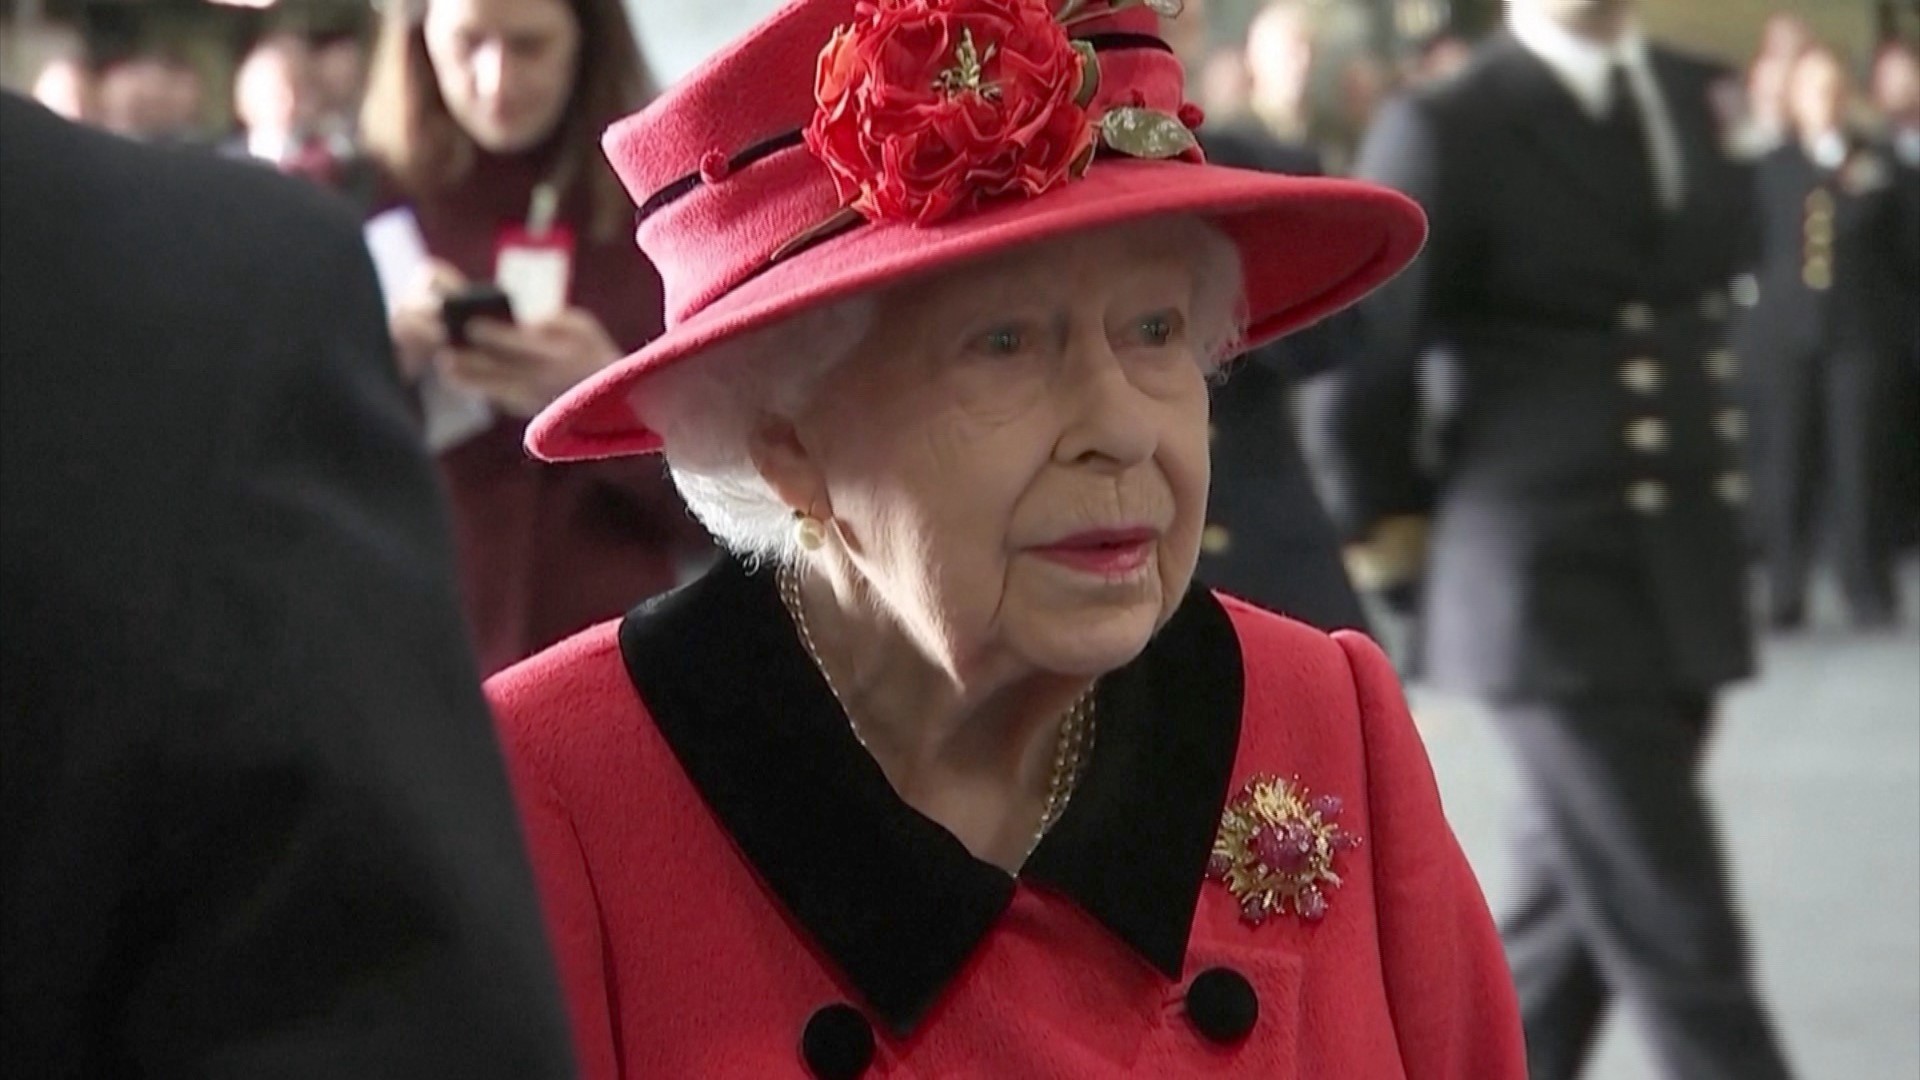 The Queen will have an escort for trooping the colour, her cousin. Buzz60's Keri Lumm has more.